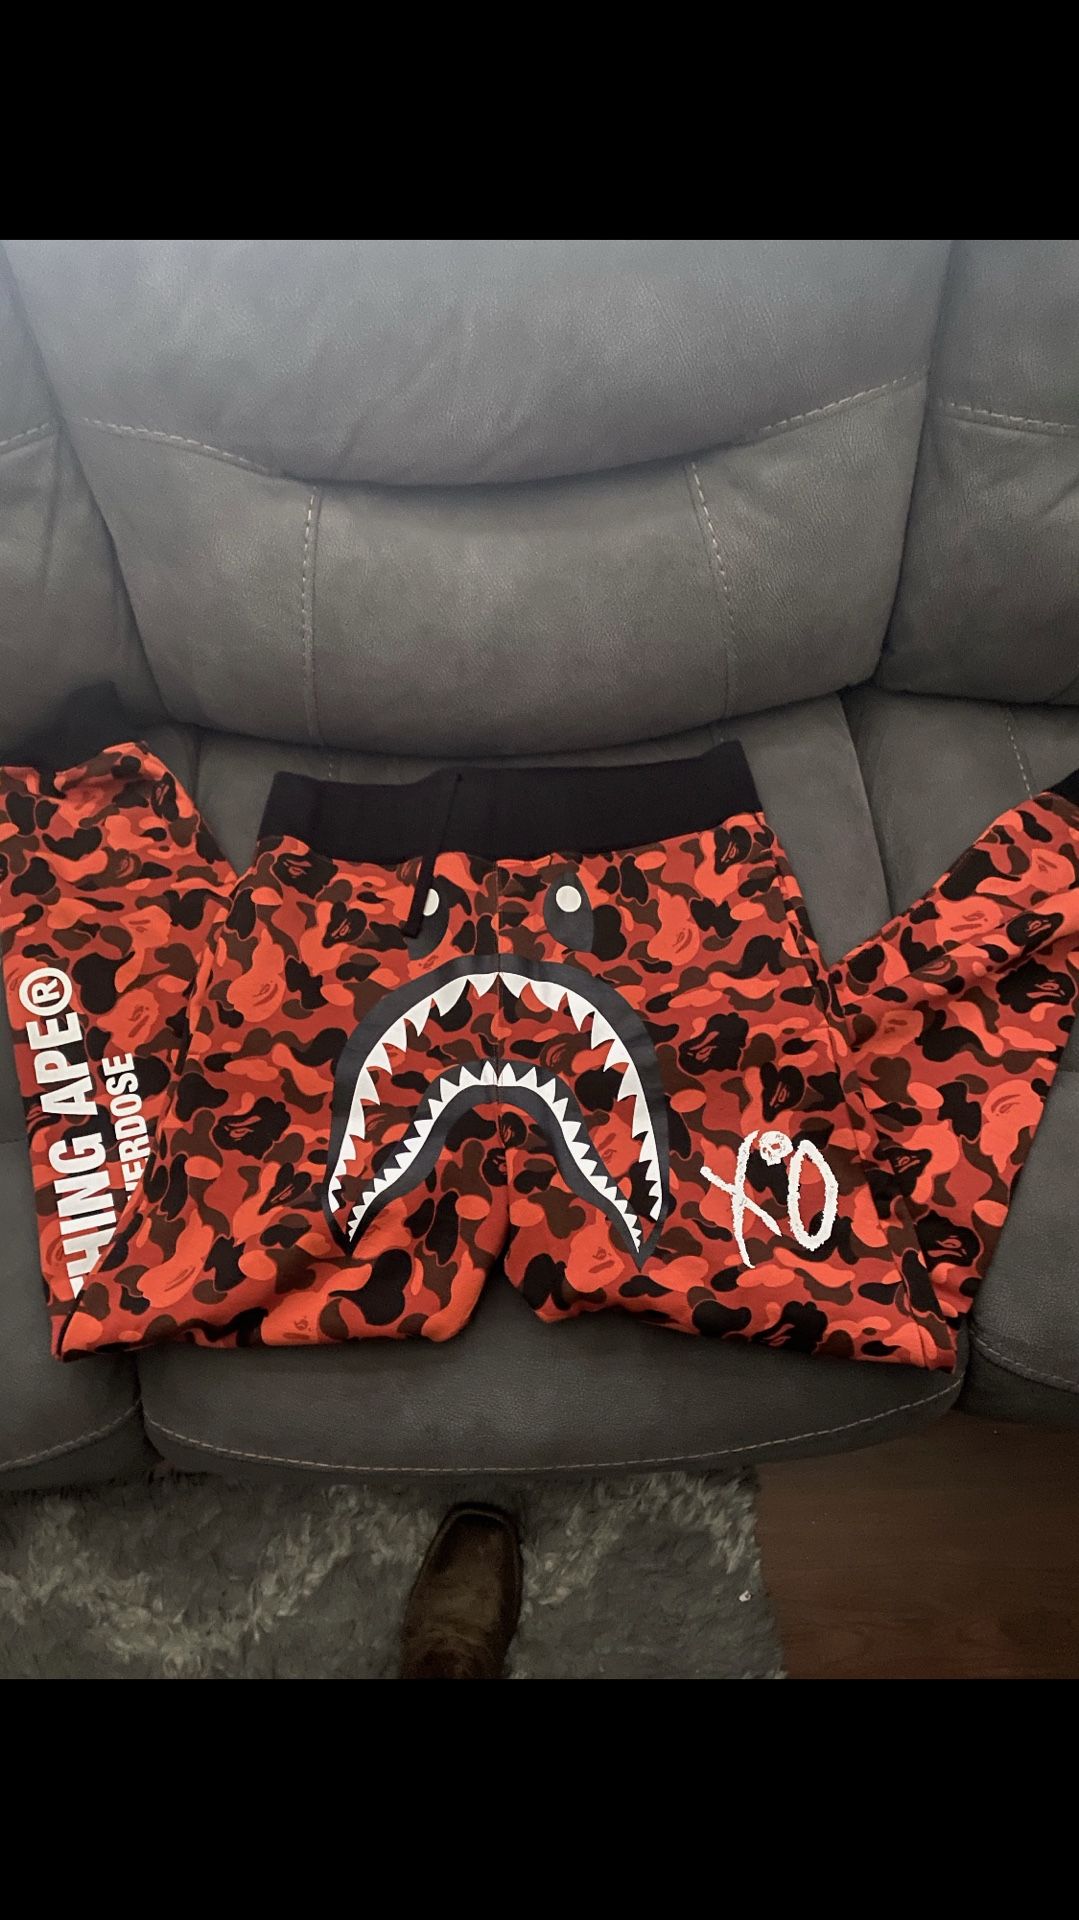 Bape X'O The Weekend Collab Large Jogger sweats 100% real authentic